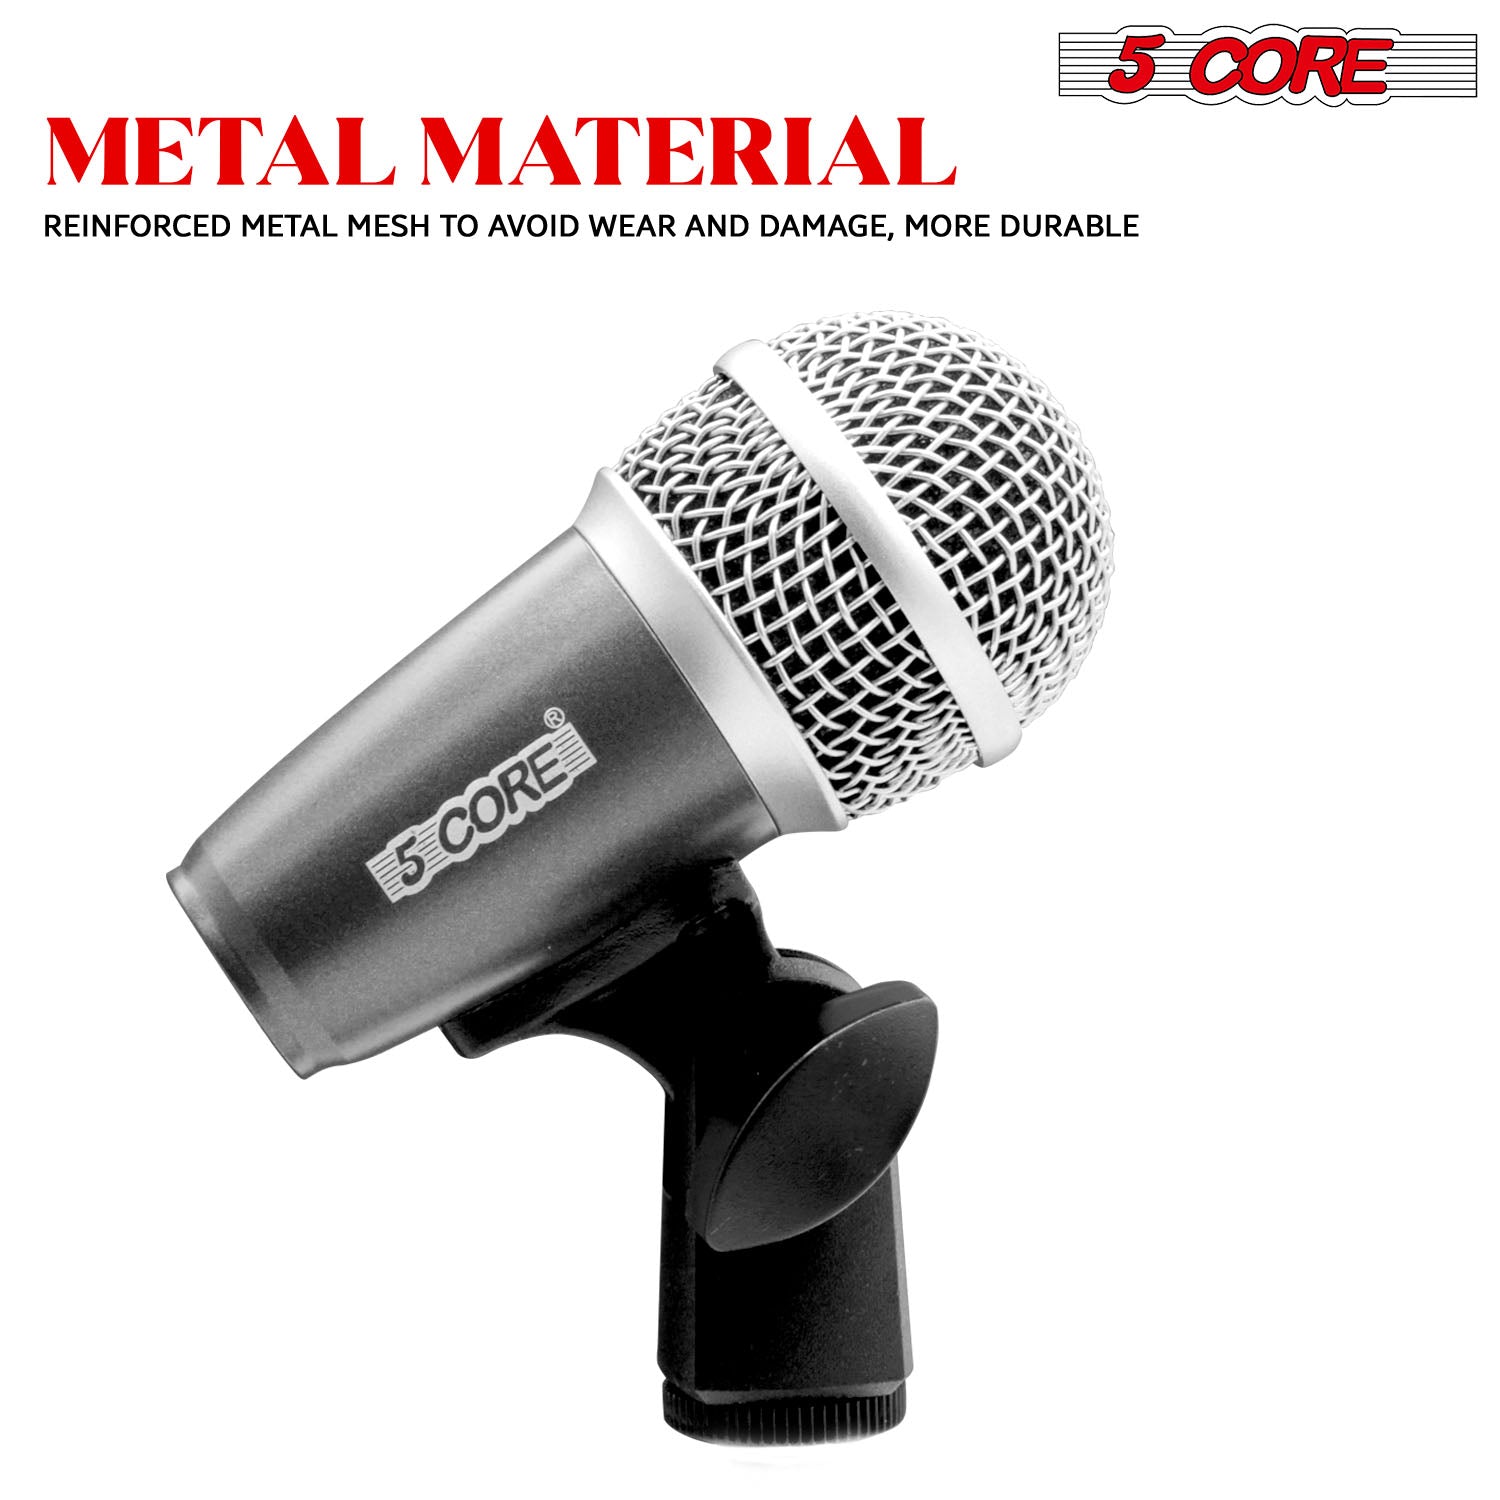 High-quality mic set including specialized mics for kick, bass, tom, and snare drums.